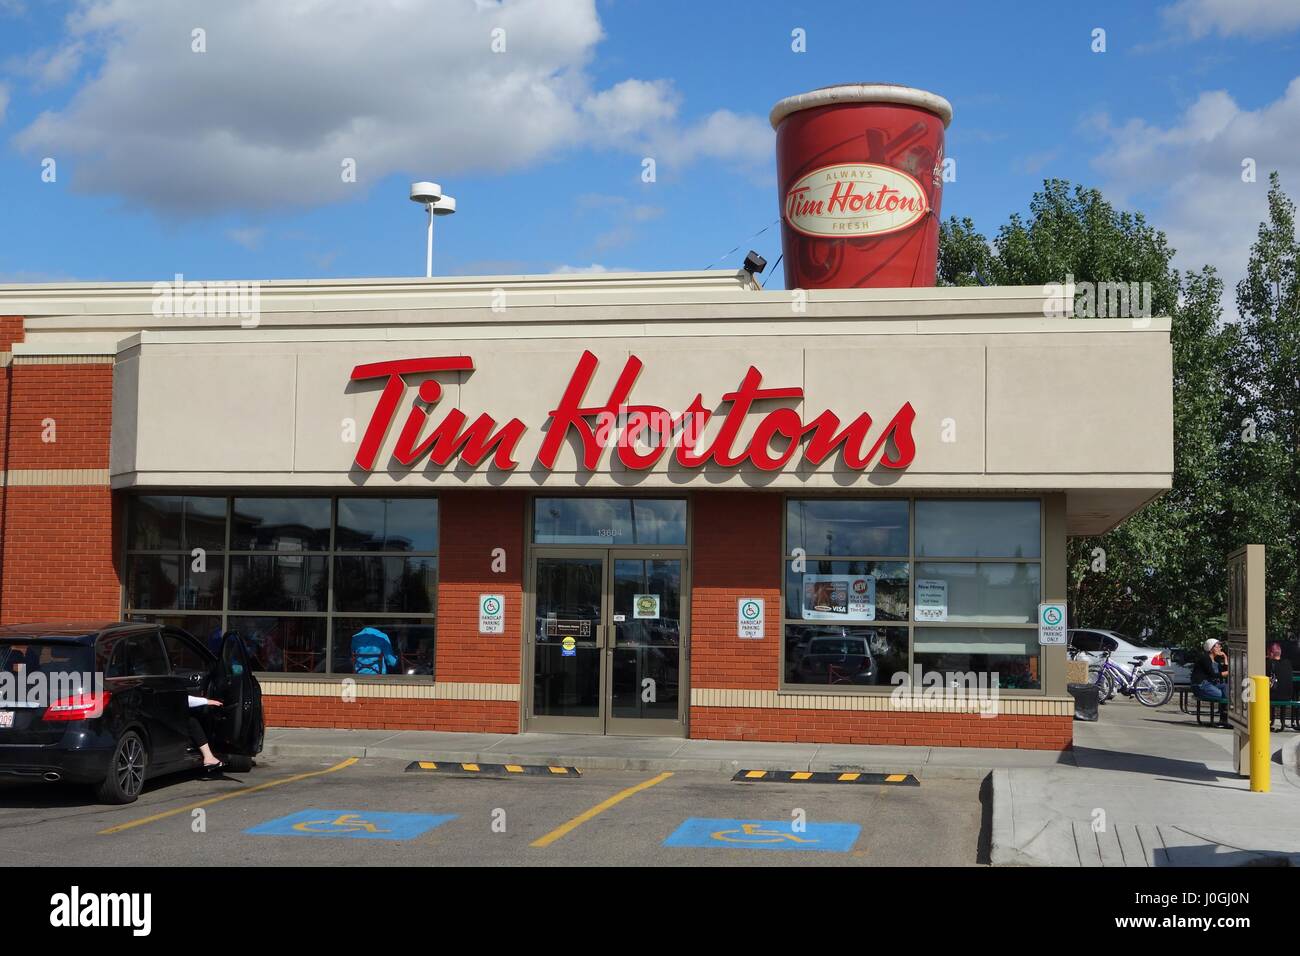 Front entrance and sign of a Tim Hortons cafe/diner in Edmonton Alberta Canada Stock Photo